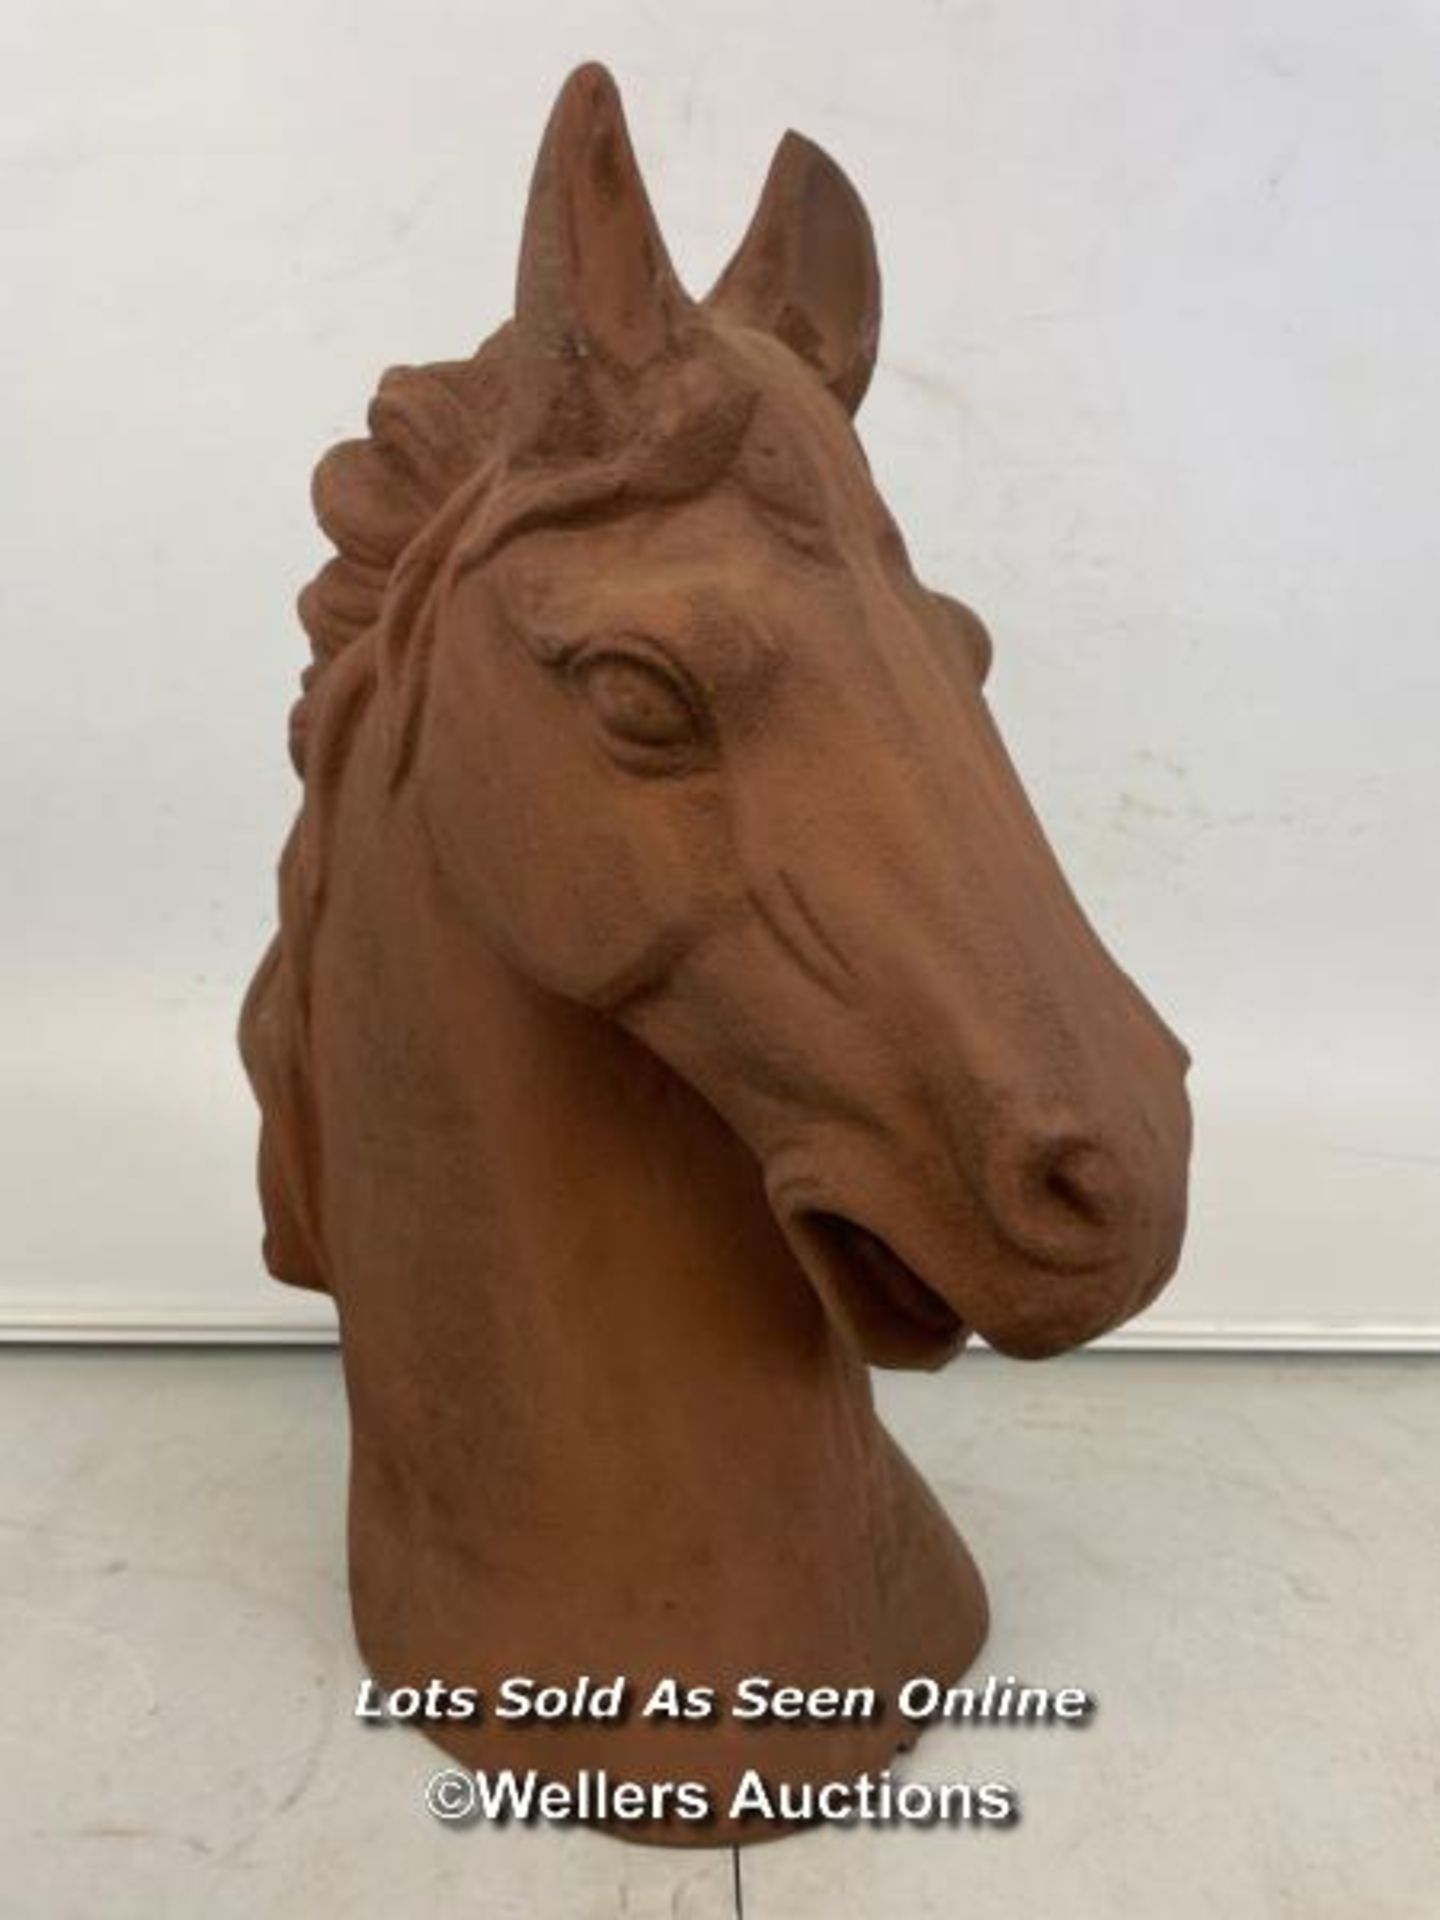 *CAST IRON HORSE BUST - 47CM H / ITEM LOCATION: GUILDFORD, GU14SJ (WELLERS AUCTIONS), COLLECTION FOR